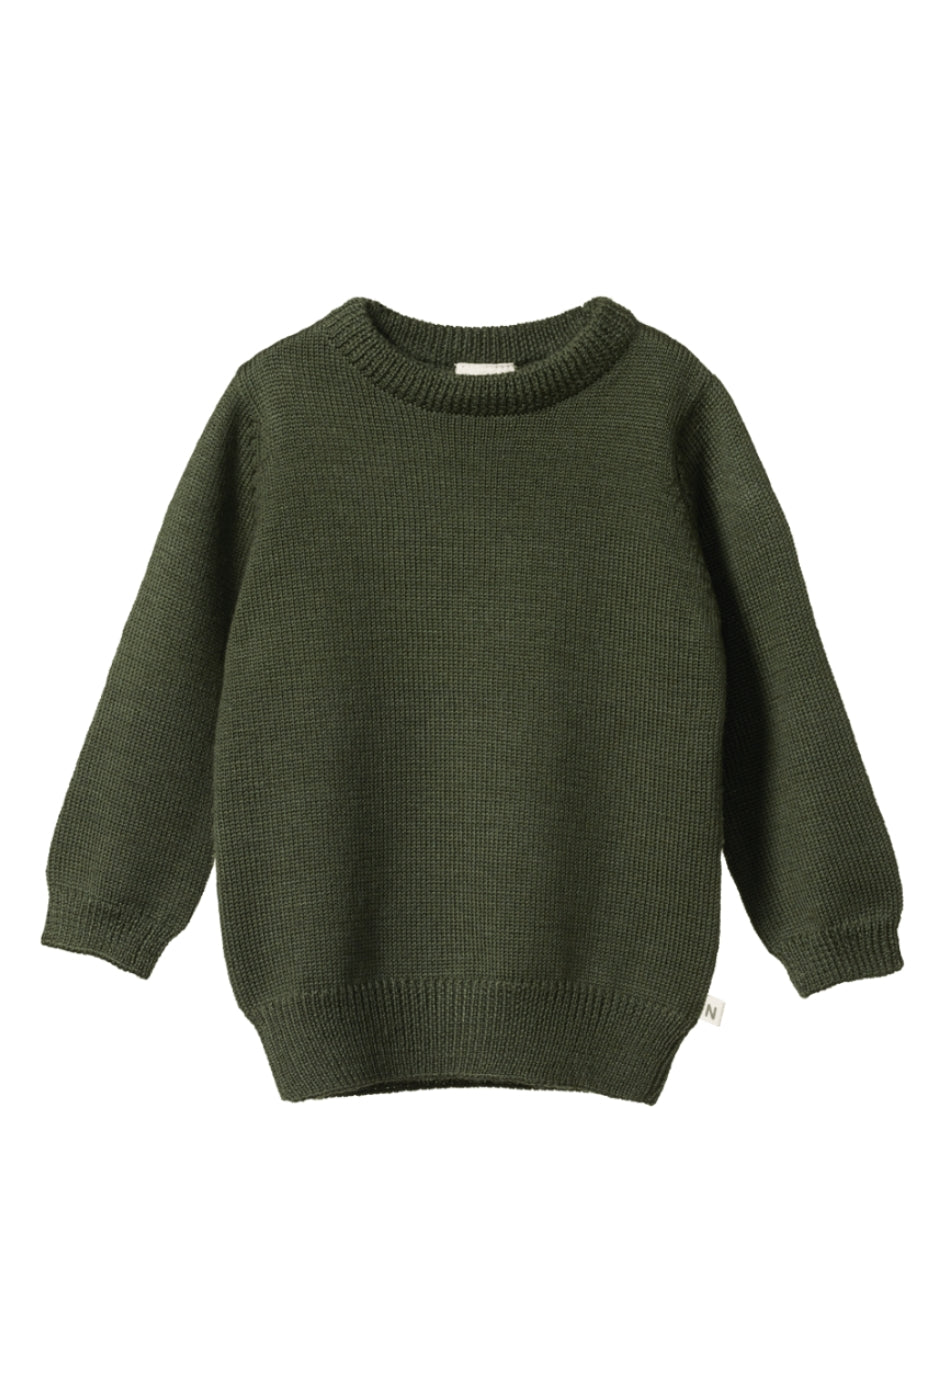 Merino Knit Pullover - Thyme-NATURE BABY-P&K The General Store